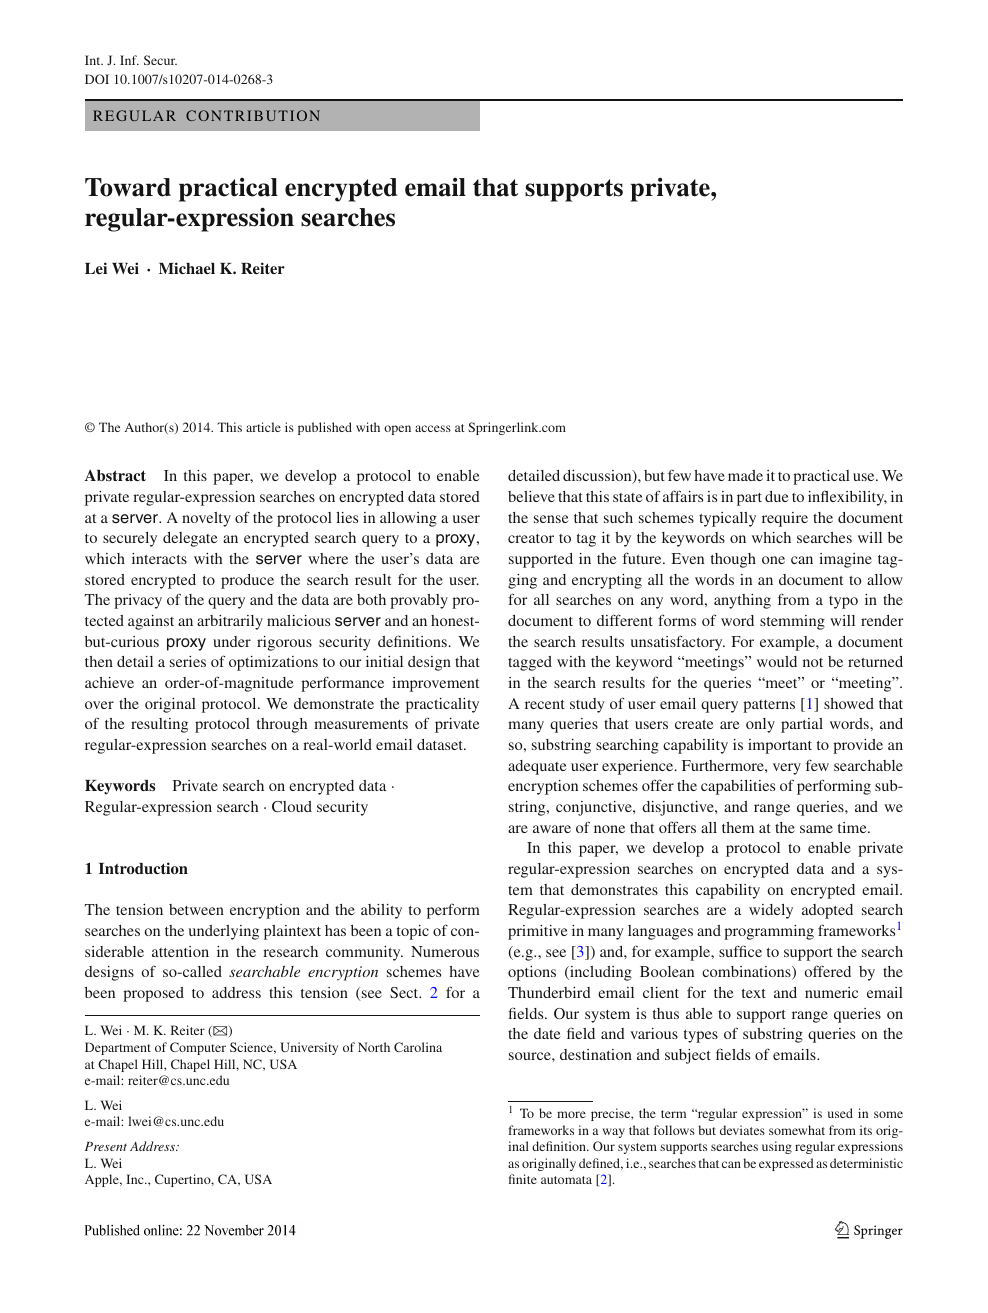 Toward Practical Encrypted Email That Supports Private Regular Expression Searches Topic Of Research Paper In Computer And Information Sciences Download Scholarly Article Pdf And Read For Free On Cyberleninka Open Science Hub